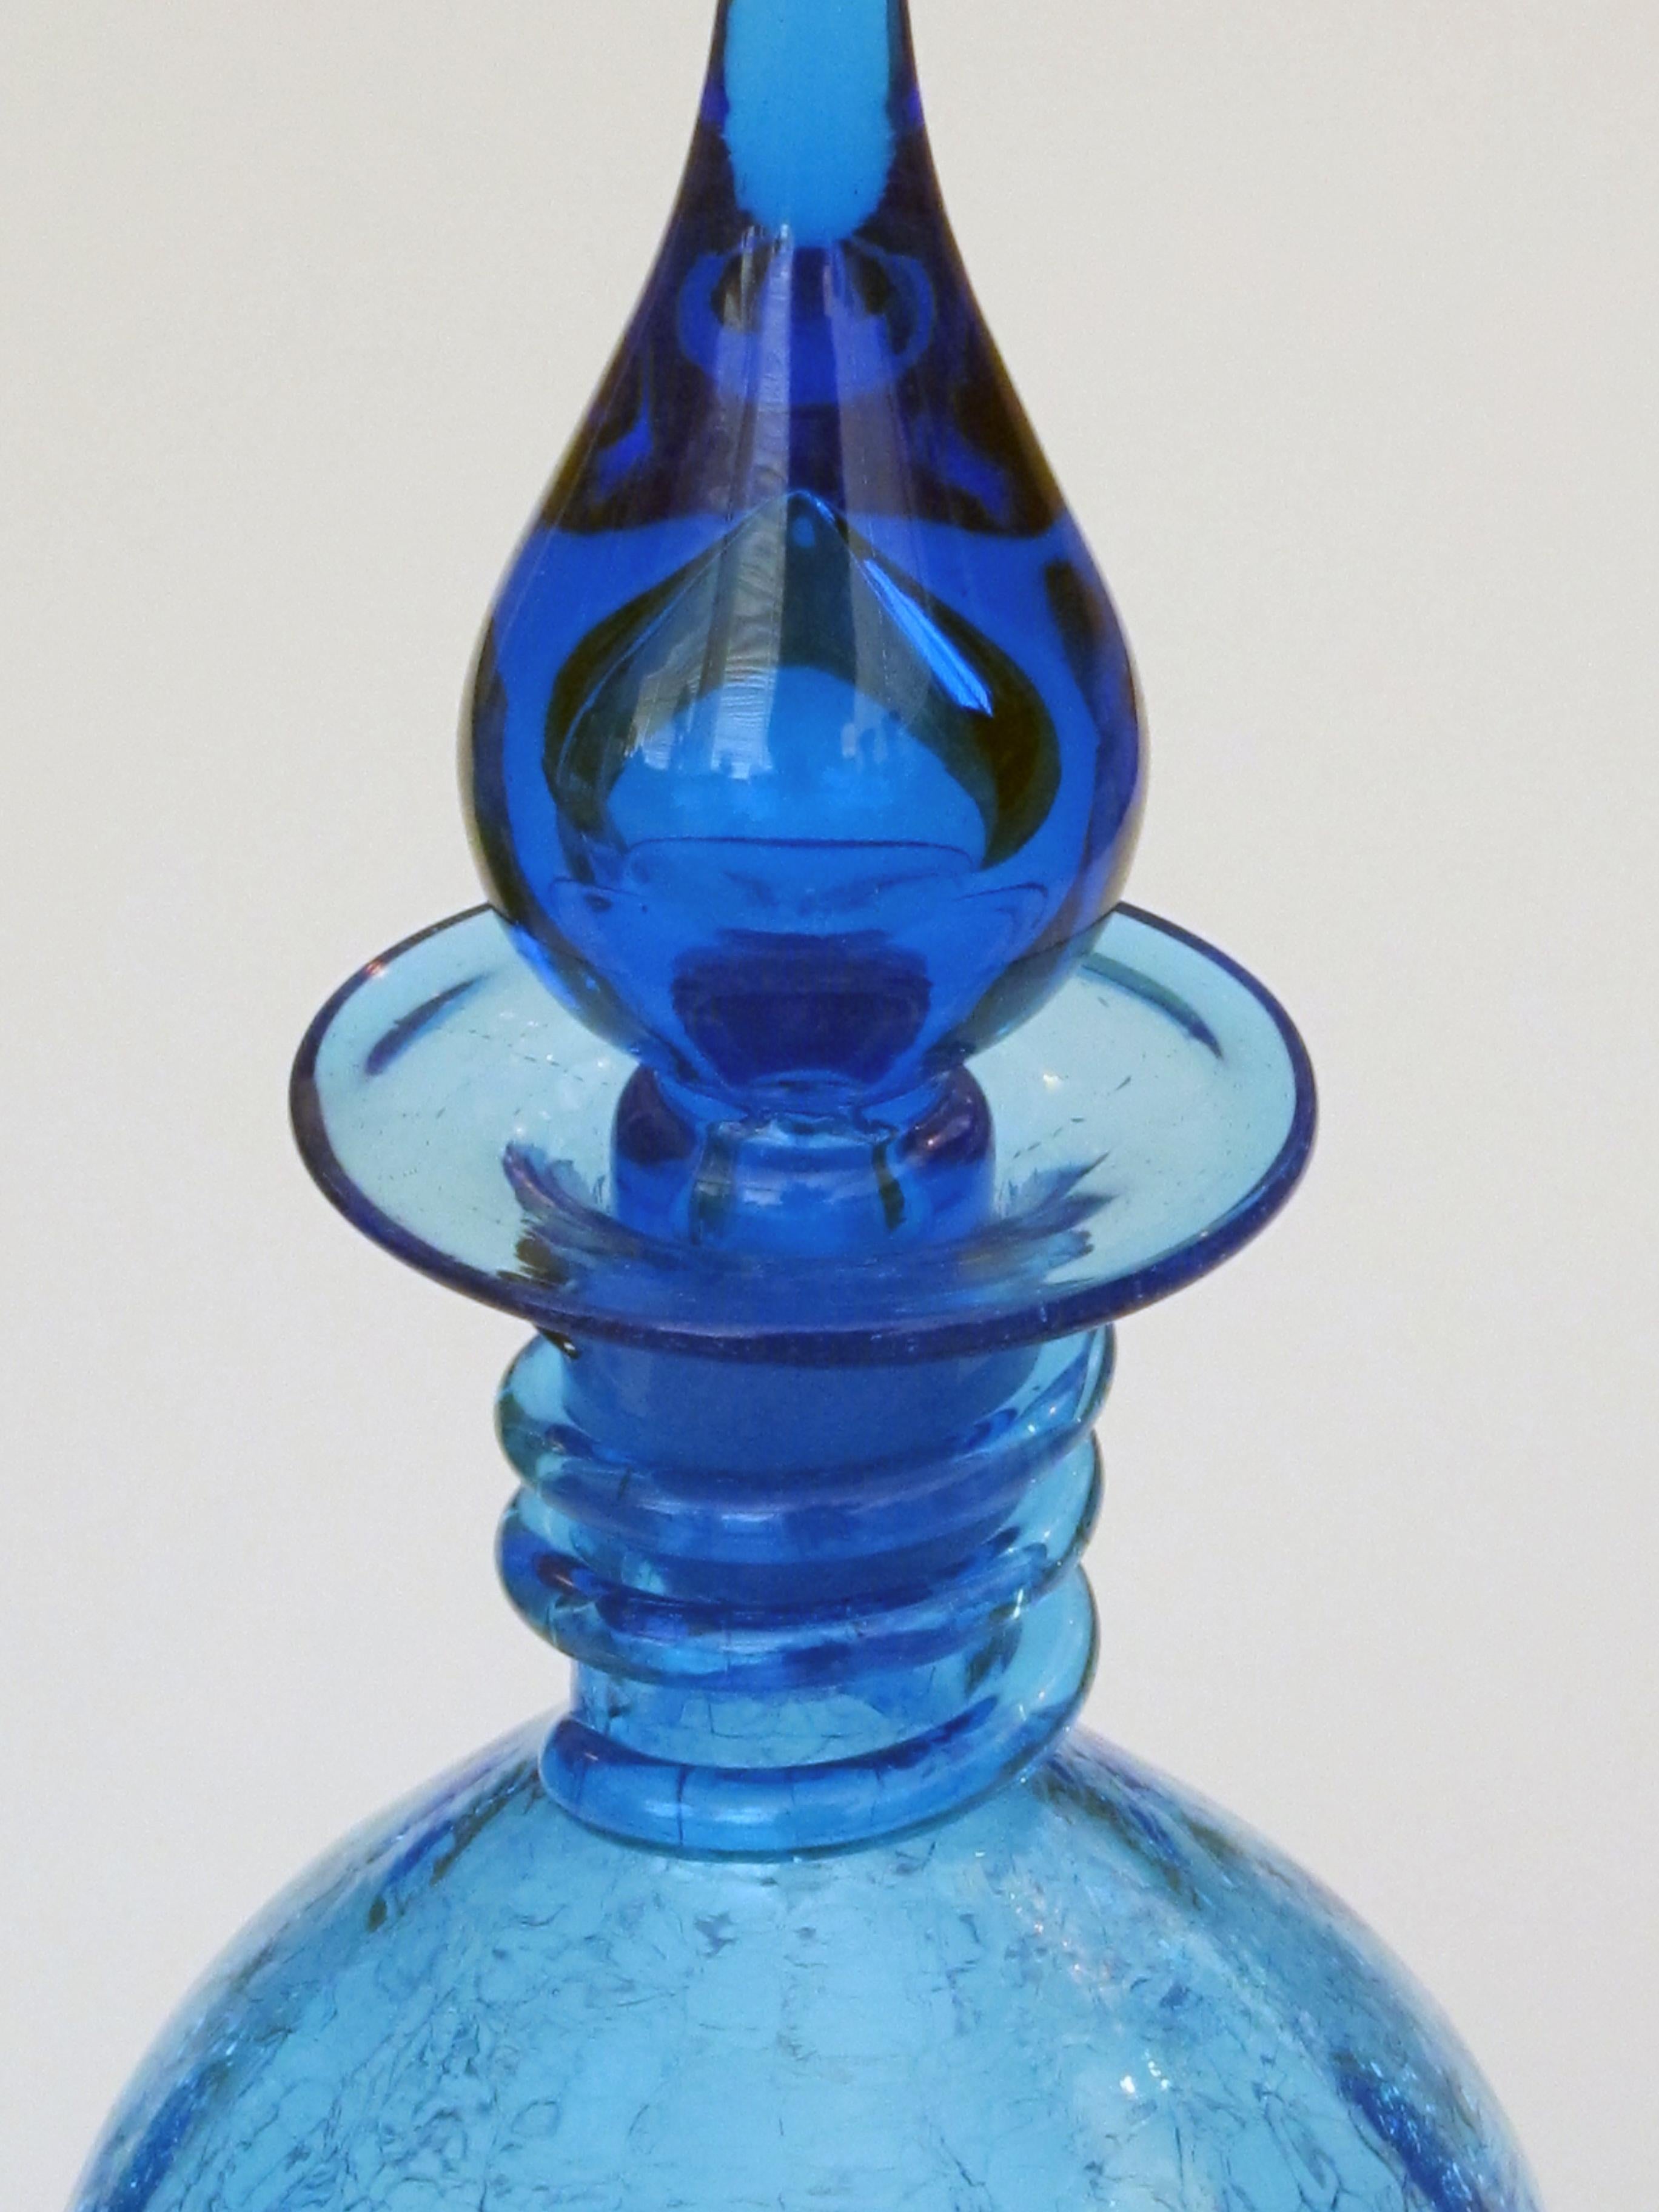 Mid-20th Century Rare Set of 3 American Art Glass Decanters by Joel Myers for Blenko Glassworks